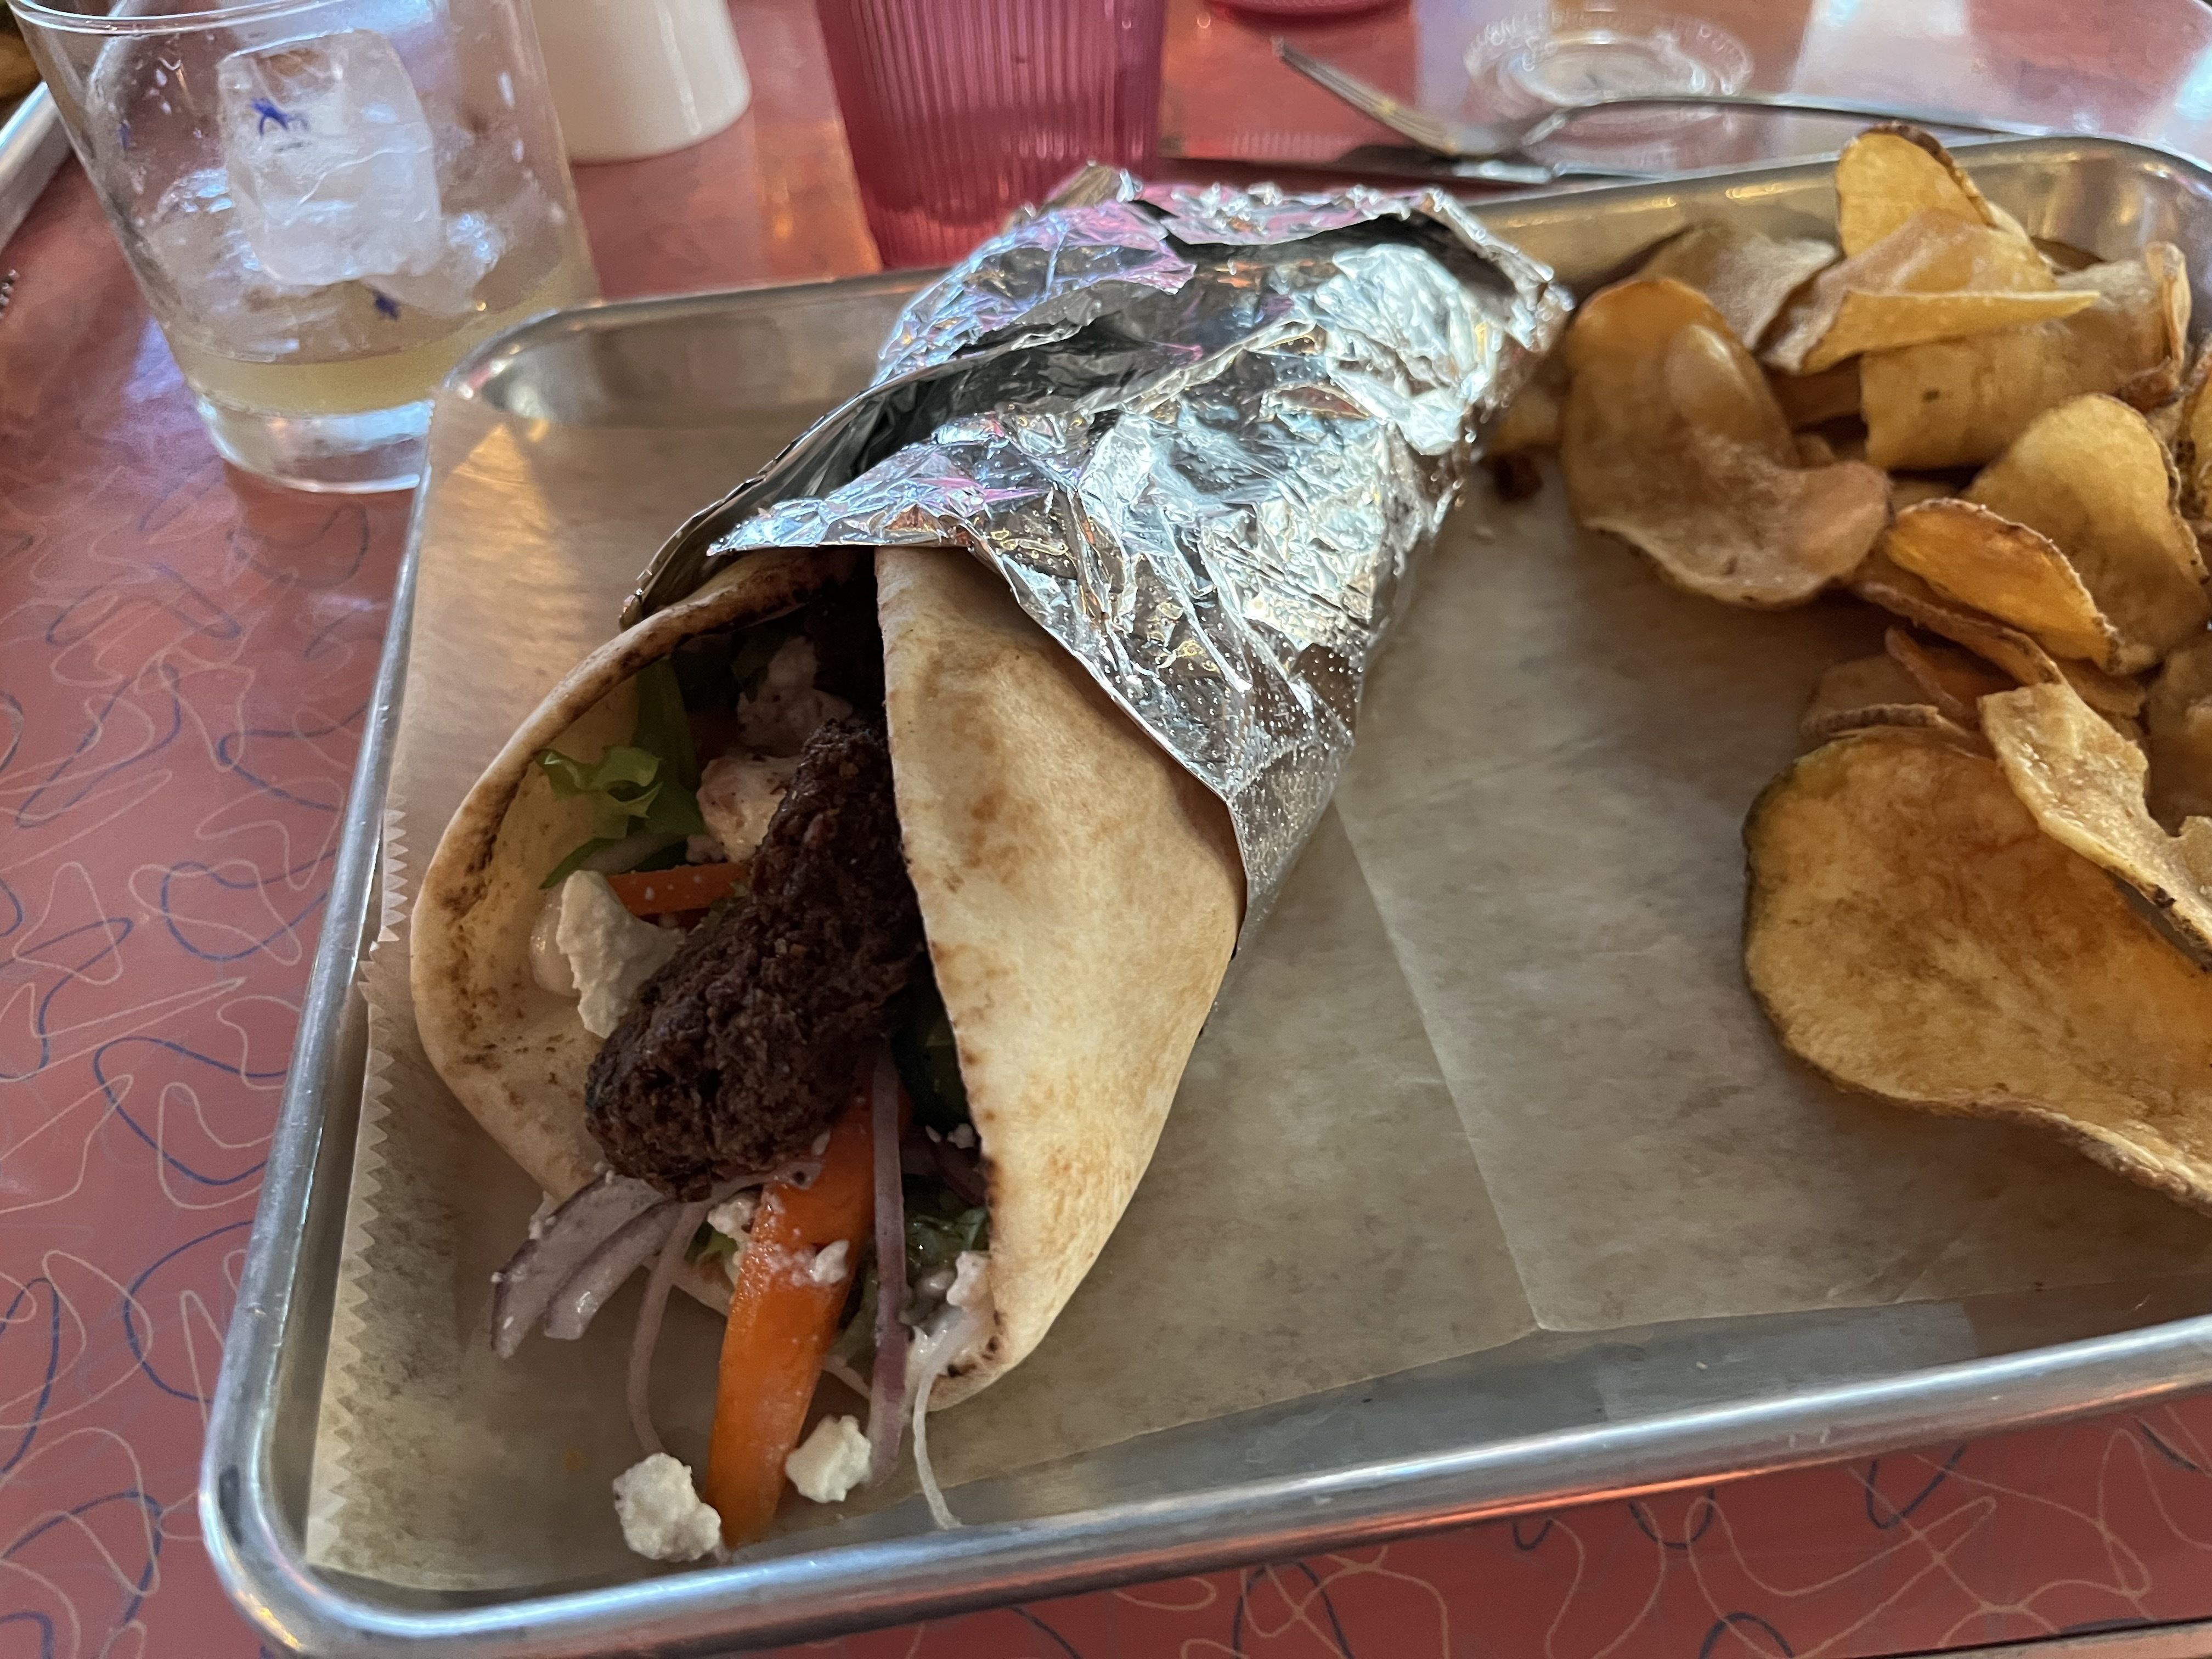 A falafal wrap in tinfoil and next to potato chips on a red table 